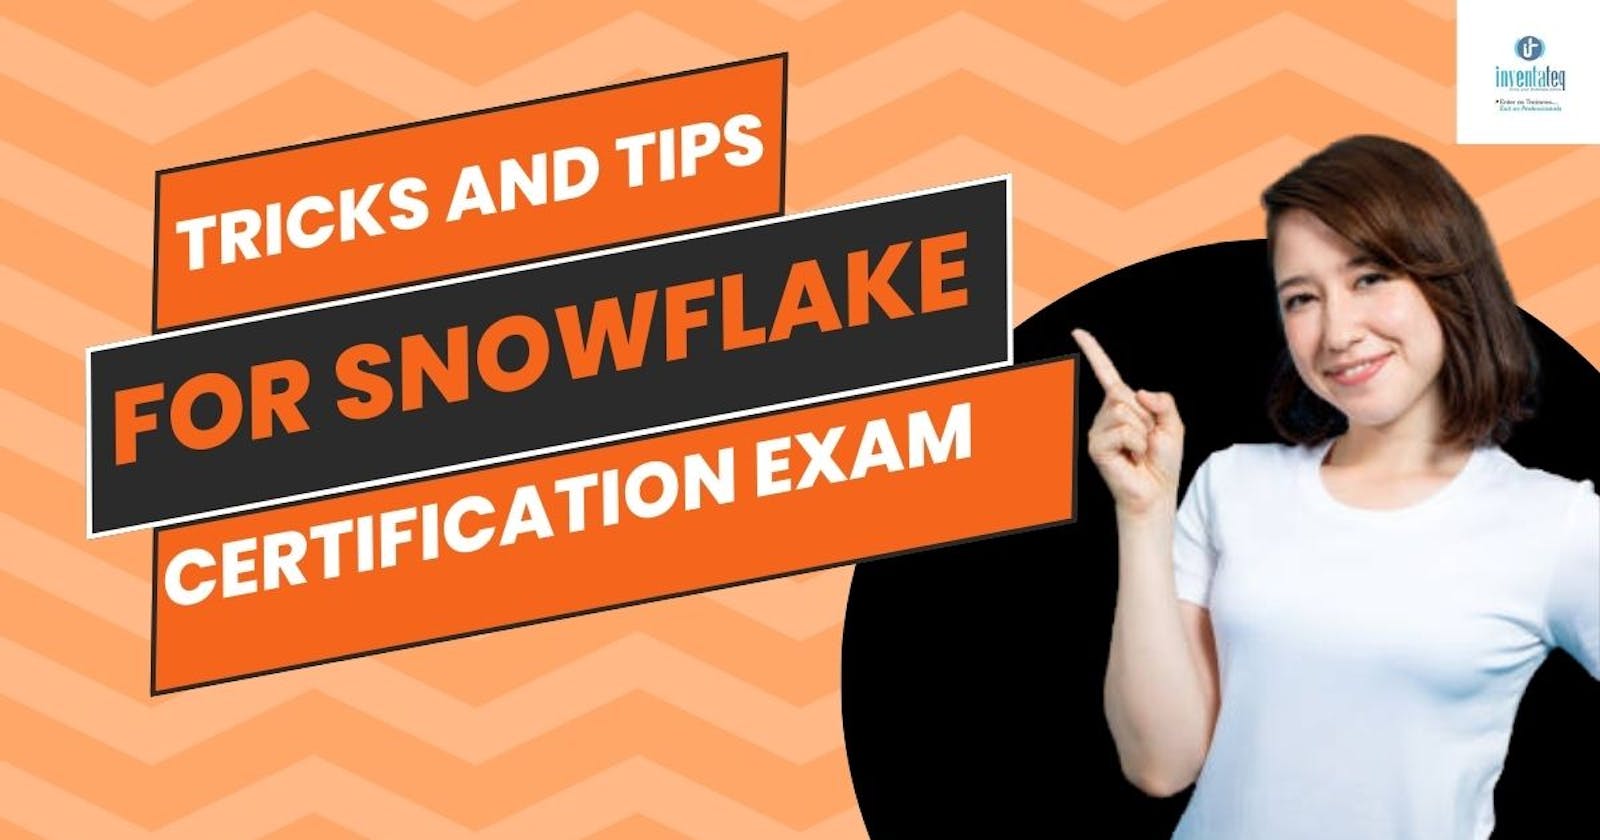 Tricks and Tips For Snowflake Certification Exam